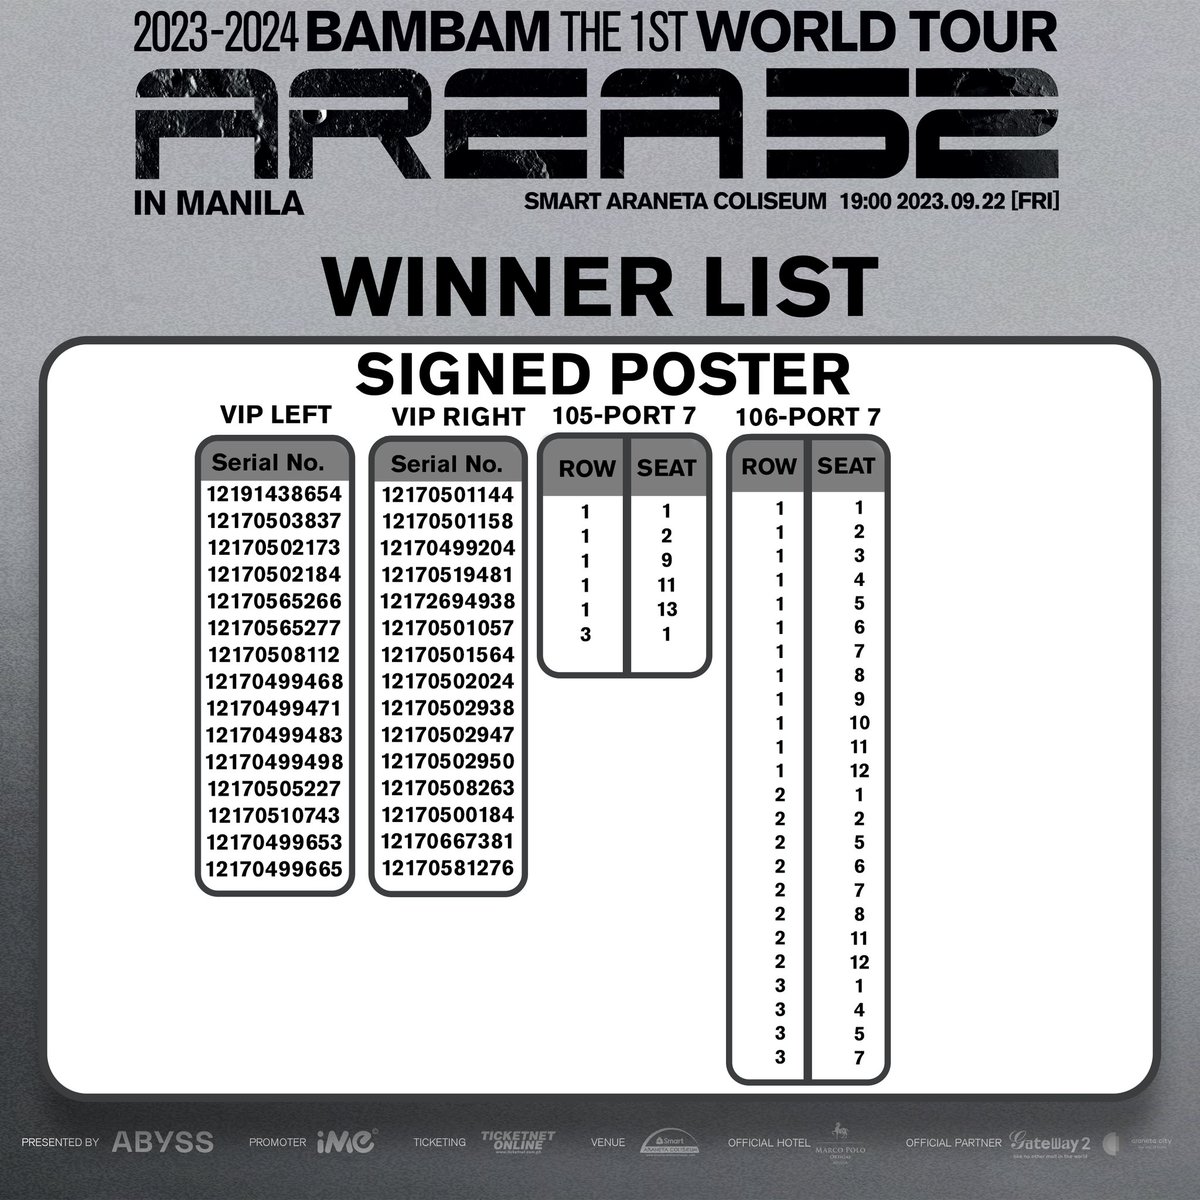 Congratulations to all the Fan Benefit Lucky Draw for Press Conference, Group Photo (1:10), Signed Poloroid, Signed Poster winners! Don't be upset for those who have yet to win any fan benefits. You still have a chance to Hi-TOUCH with BamBam!